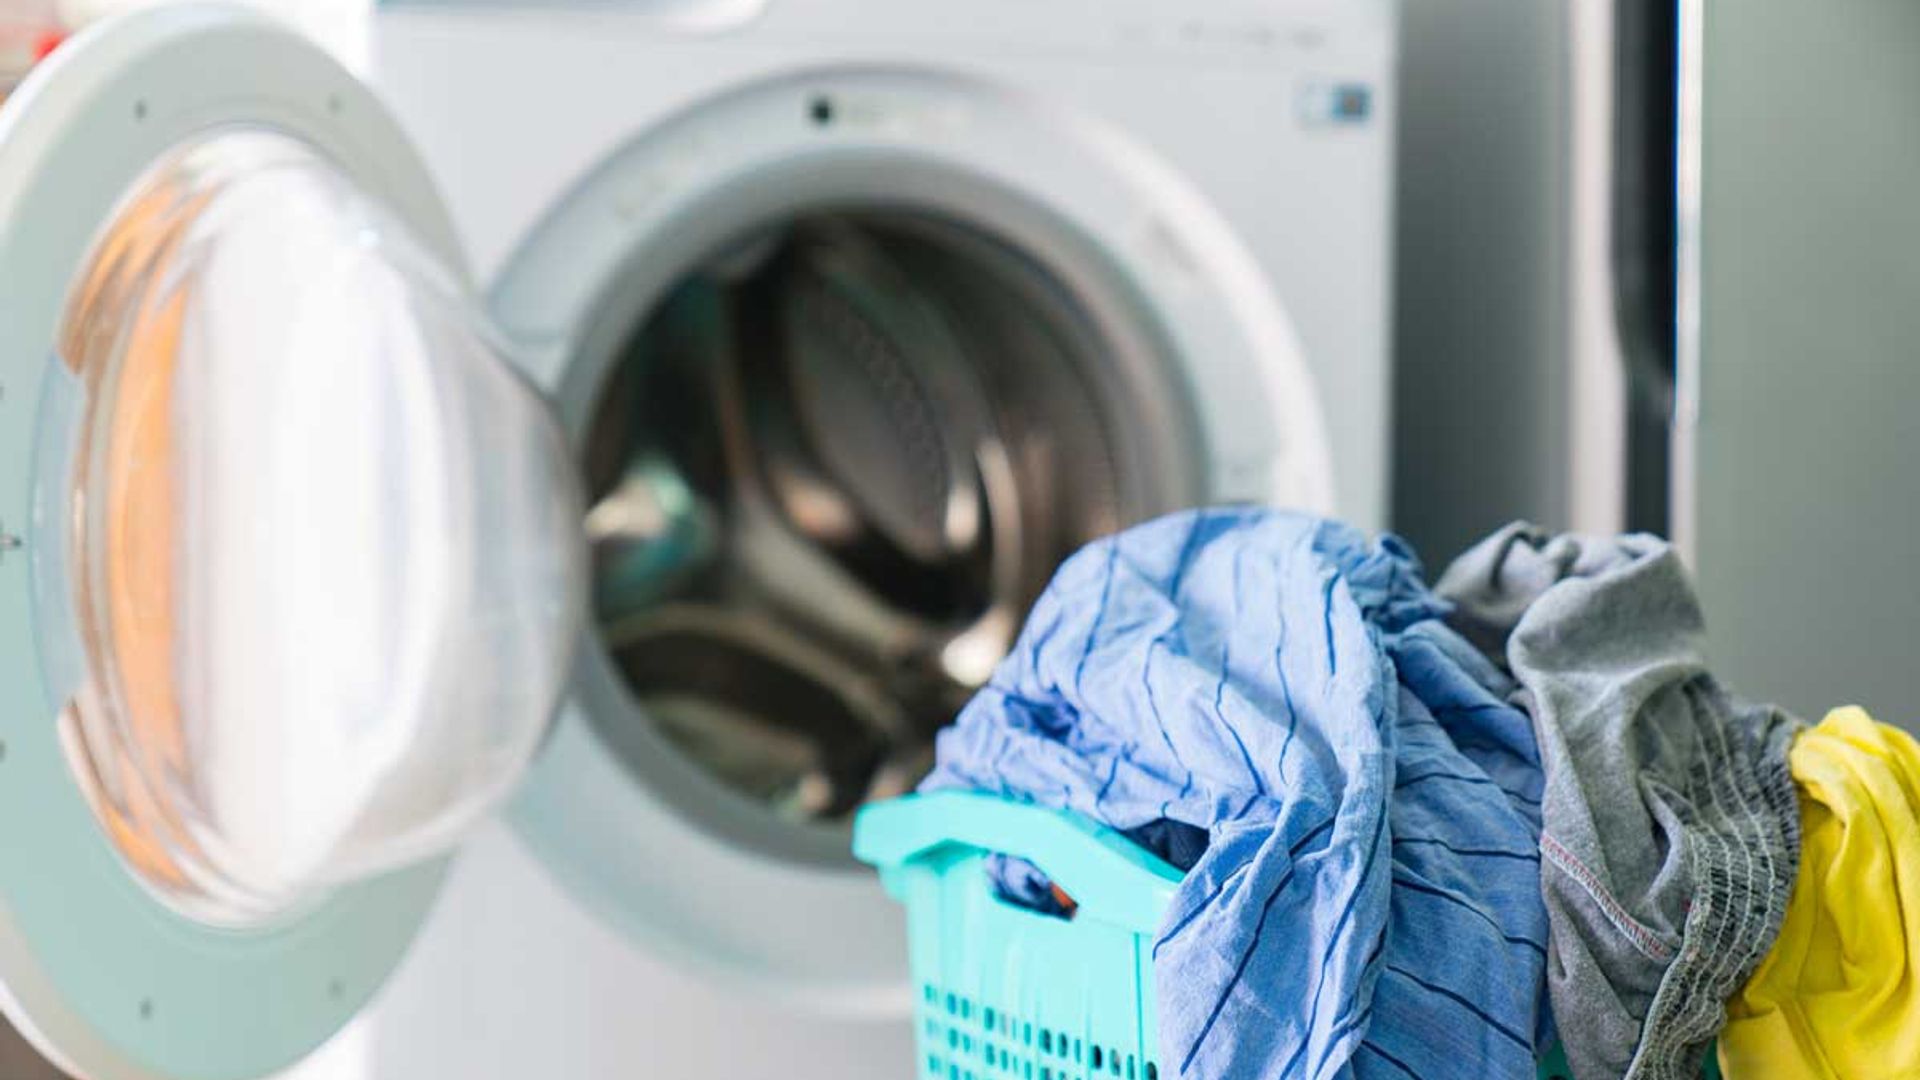 How to wash and dry your clothes effectively during the coronavirus pandemic | HELLO!